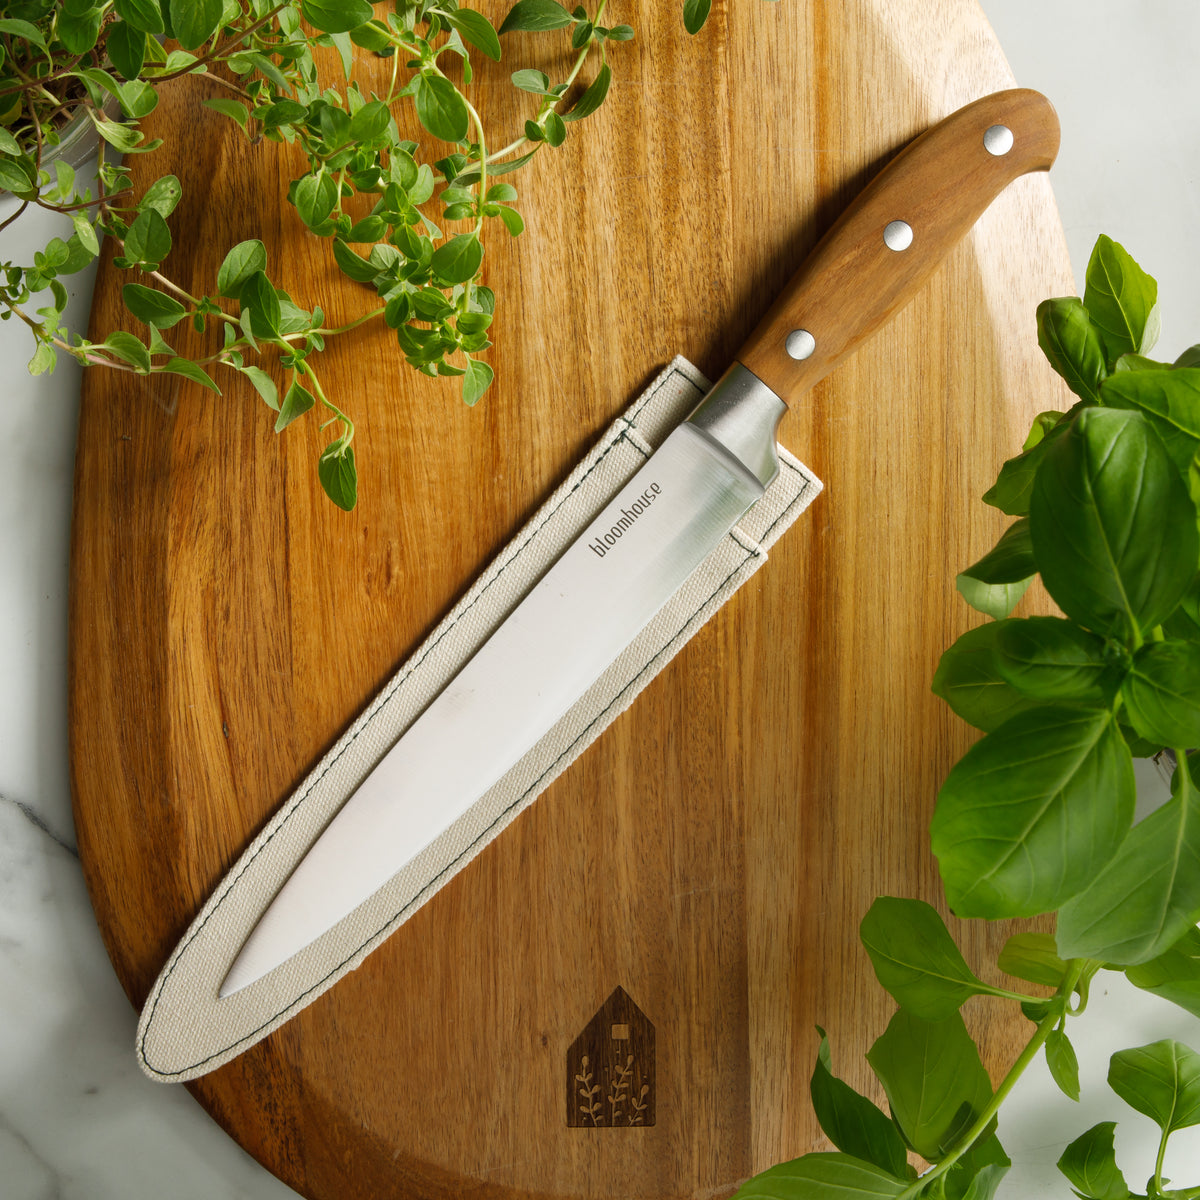 Bloomhouse 8 inch German Steel Slicer Knife w/ Olive Wood Forged Handle